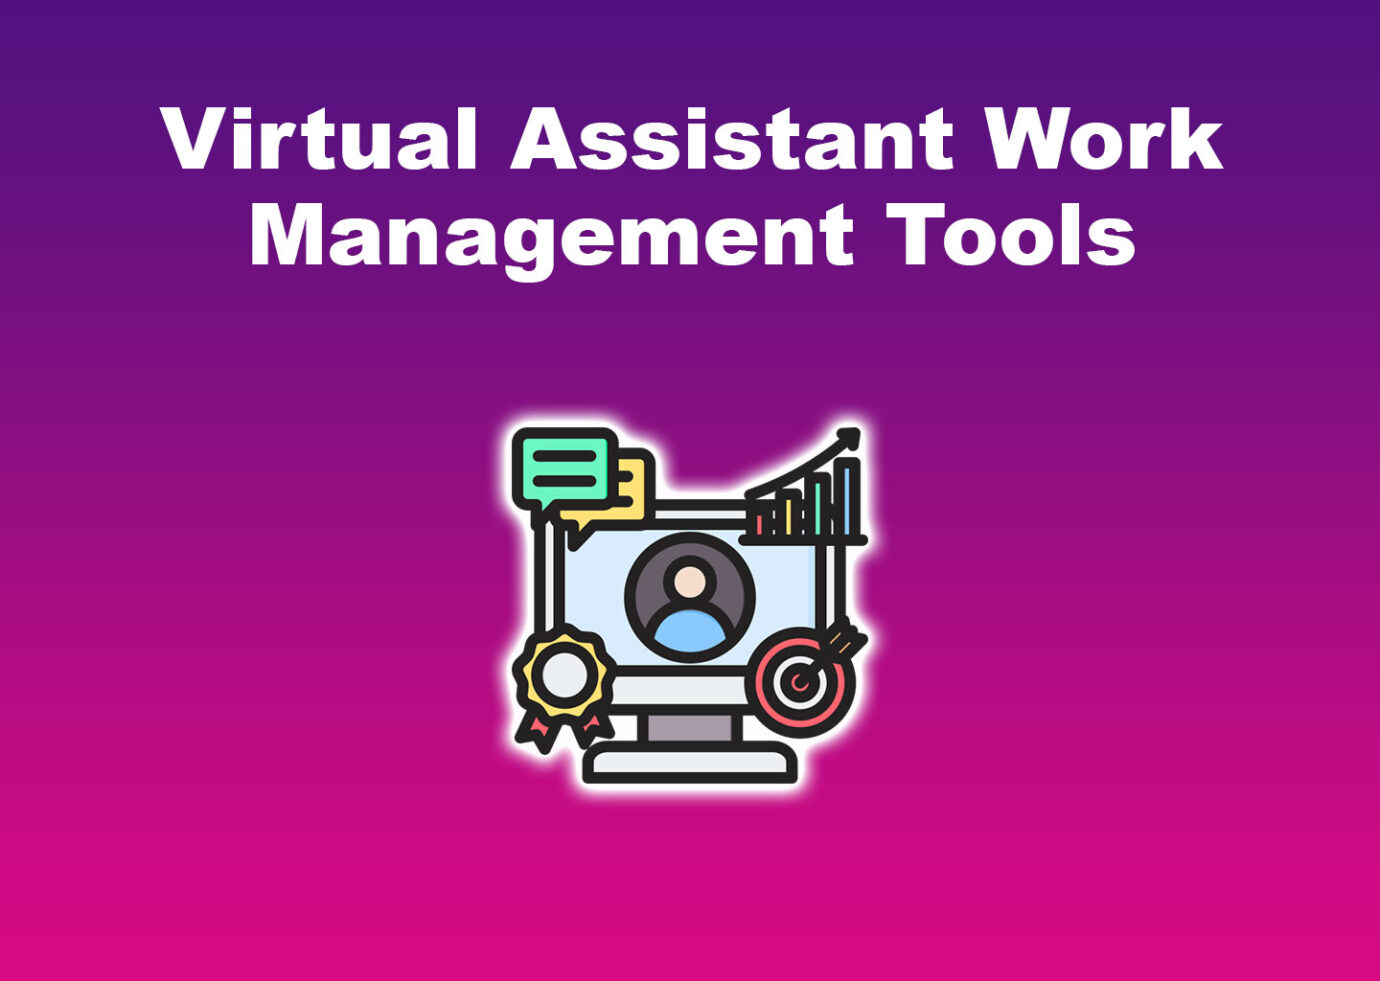 Virtual Assistant Work Management Tools